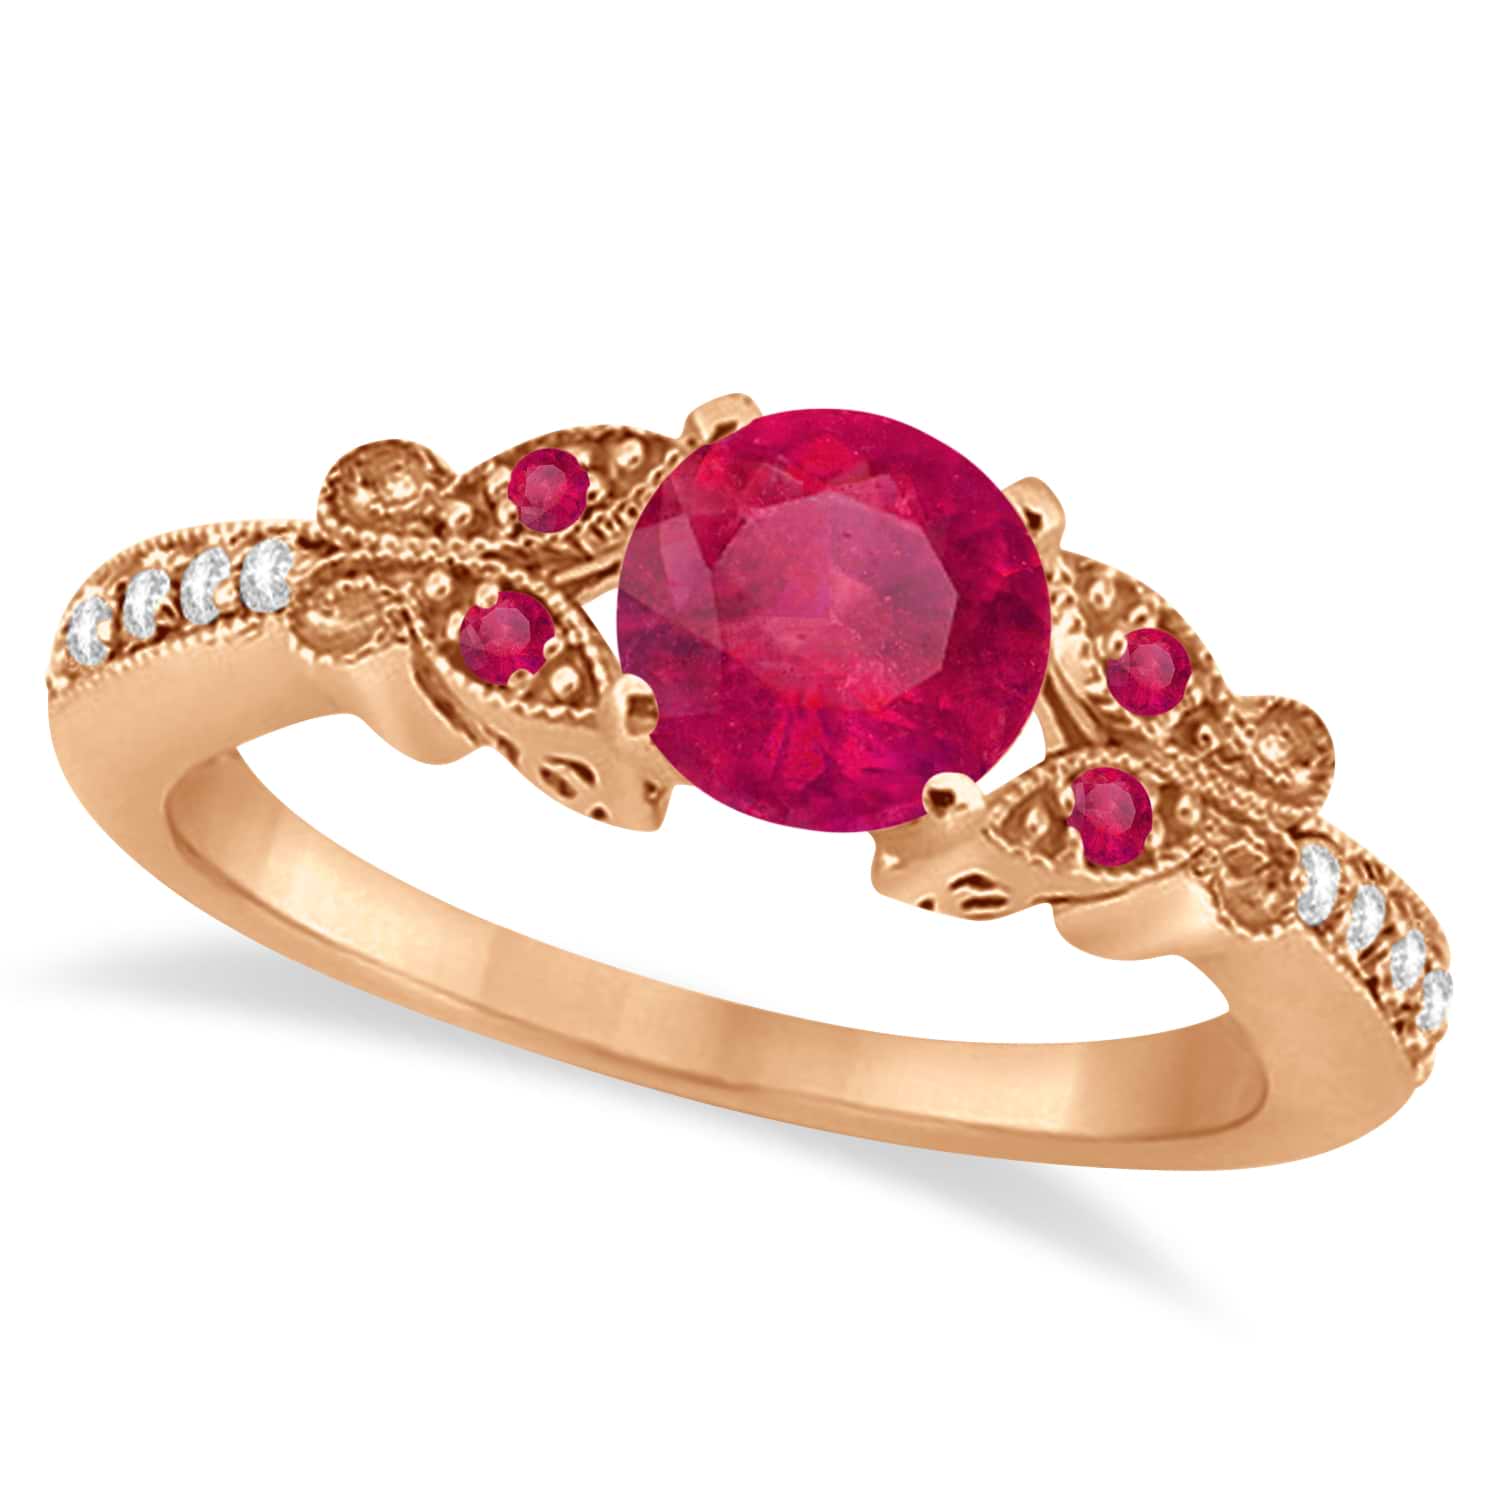 Butterfly Genuine Ruby & Diamond Engagement Ring 18K Rose Gold 1.26ct